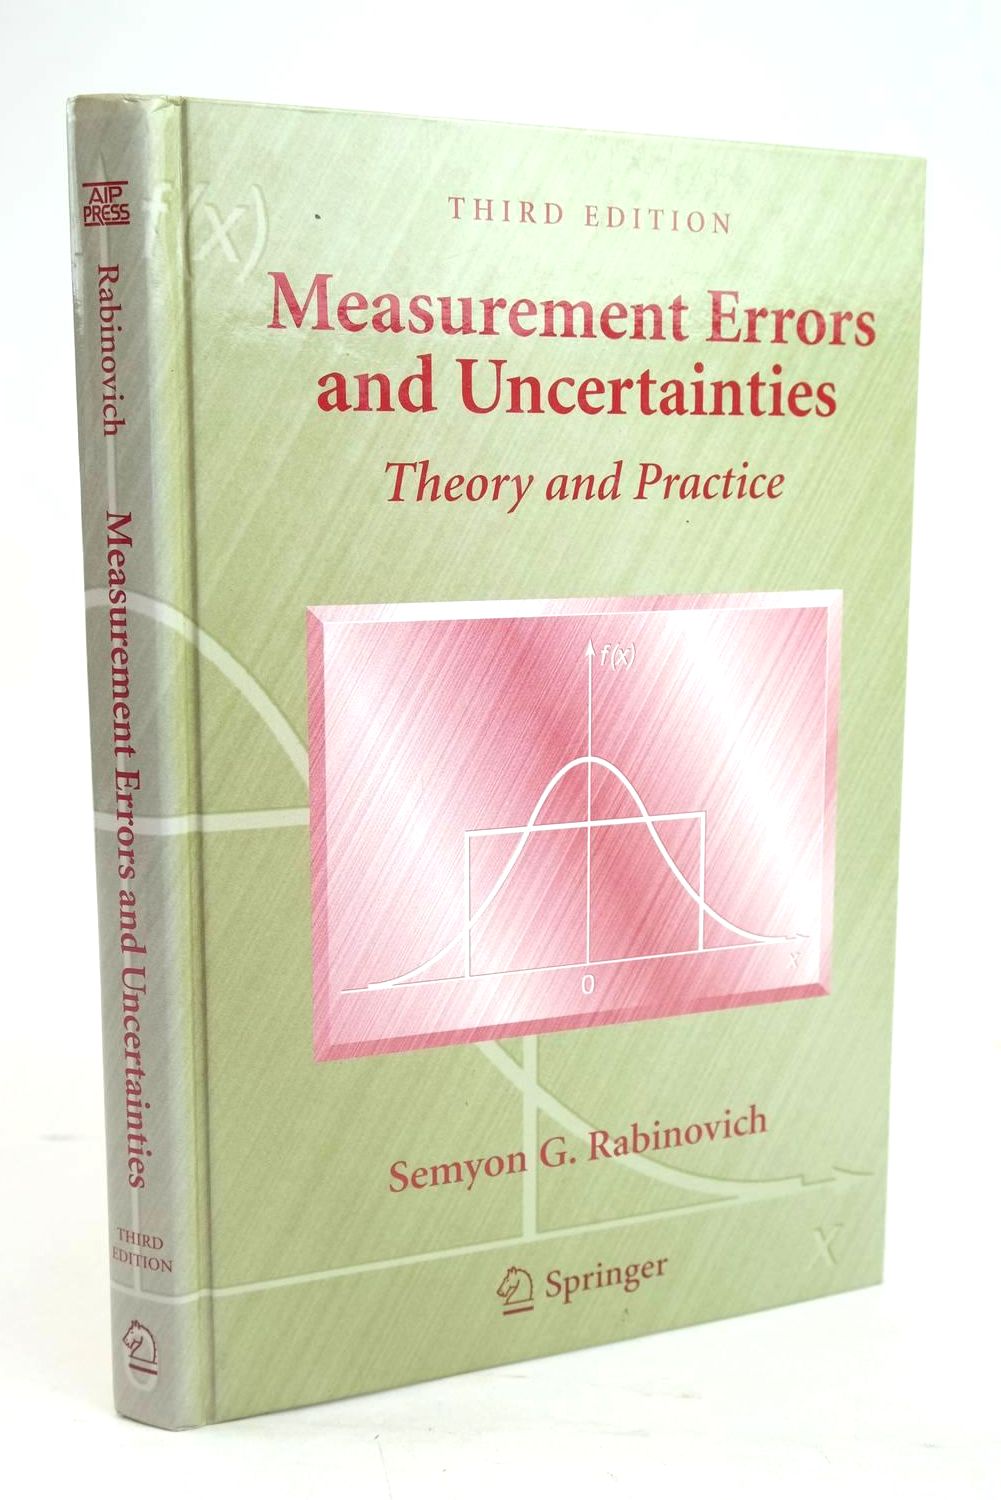 Photo of MEASUREMENT ERRORS AND UNCERTAINTIES - THEORY AND PRACTICE written by Rabinovich, Semyon G. published by Aip Press, Springer (STOCK CODE: 1319670)  for sale by Stella & Rose's Books